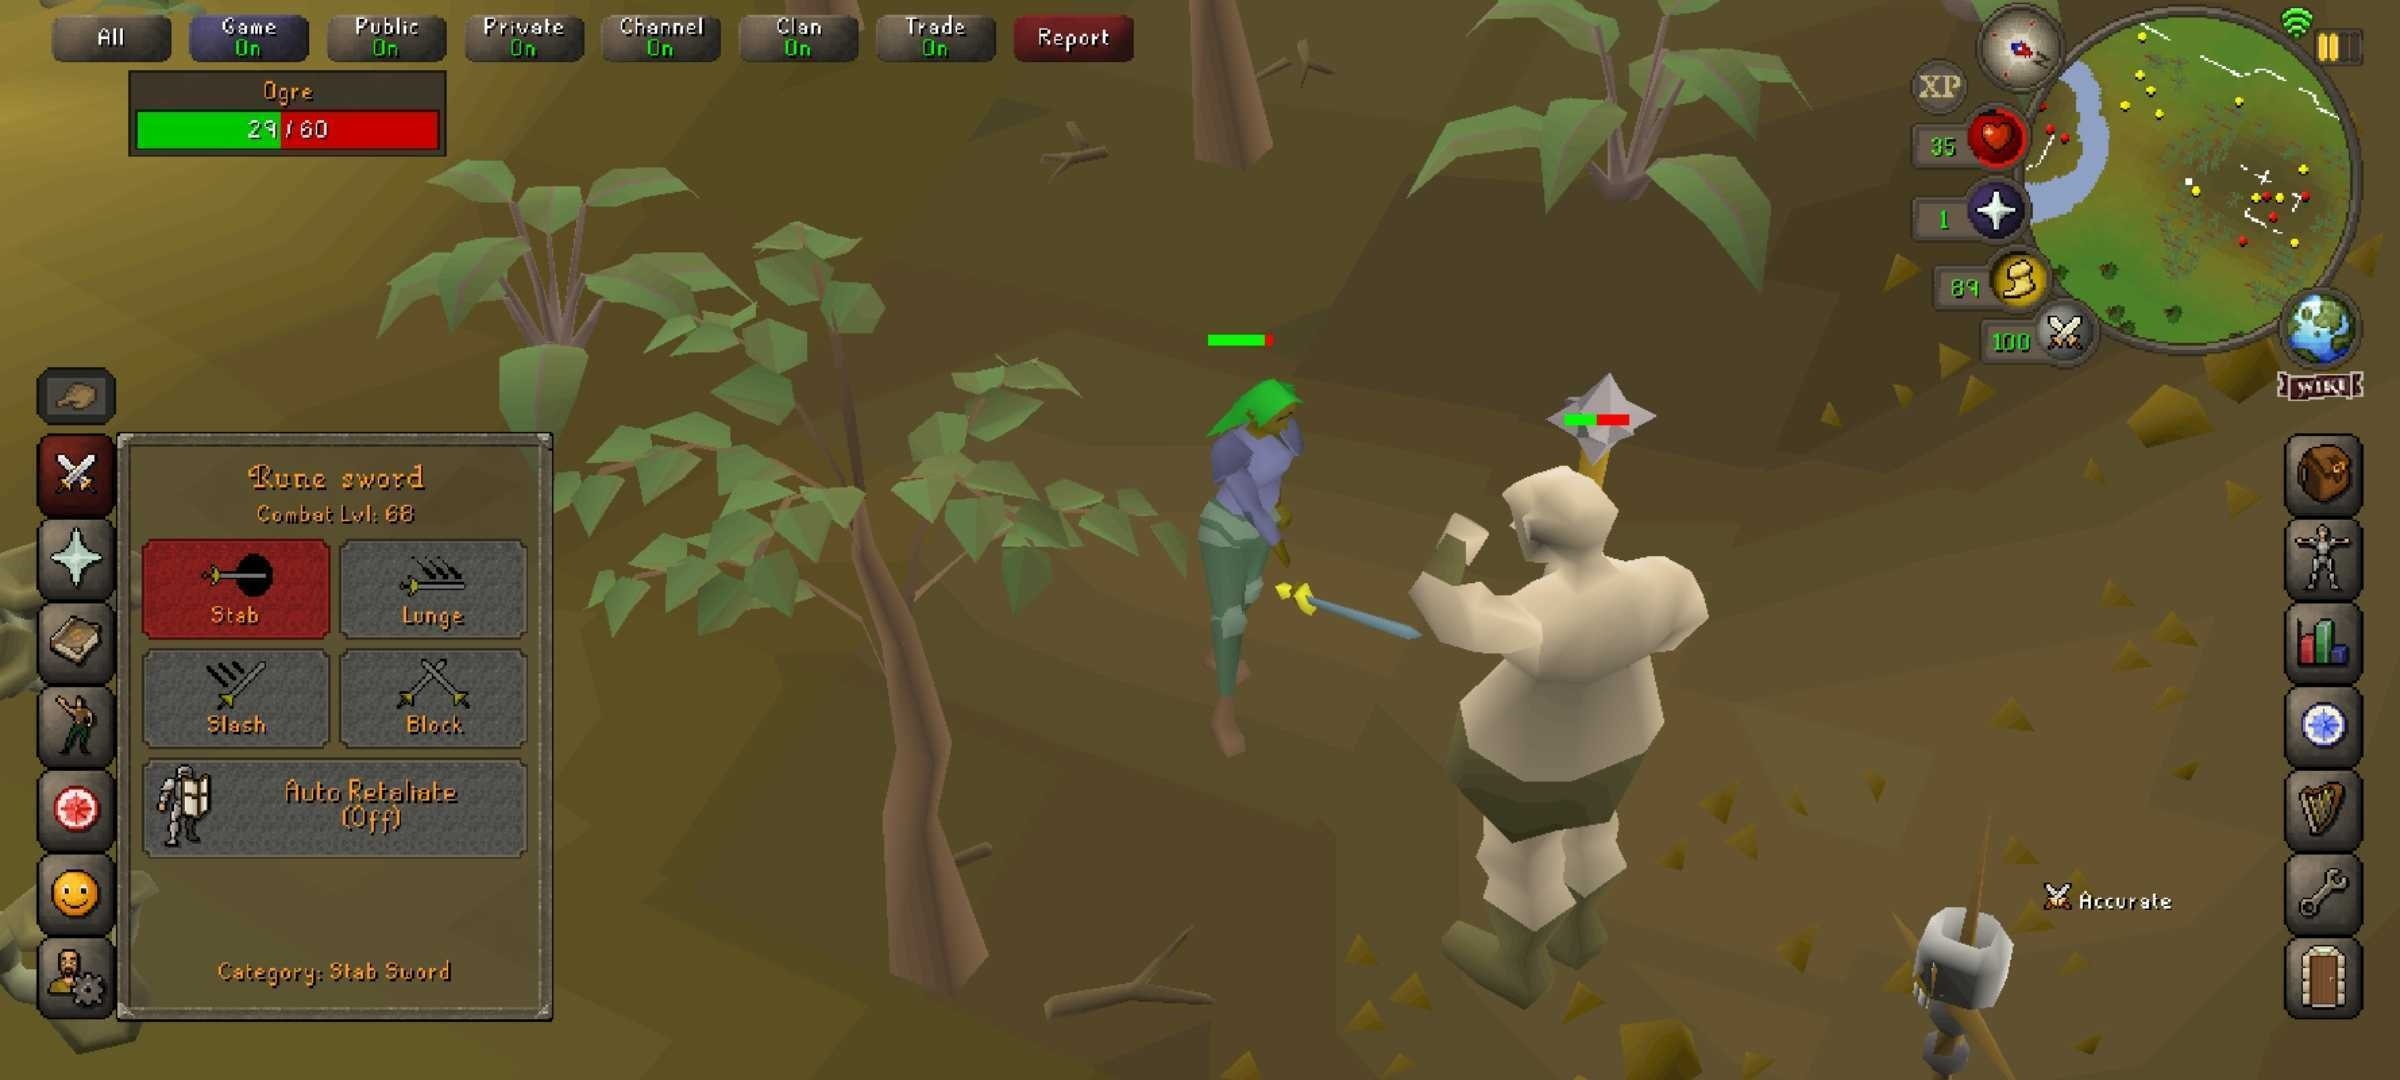 Old School RuneScape previews the dungeon beneath Varlamore in